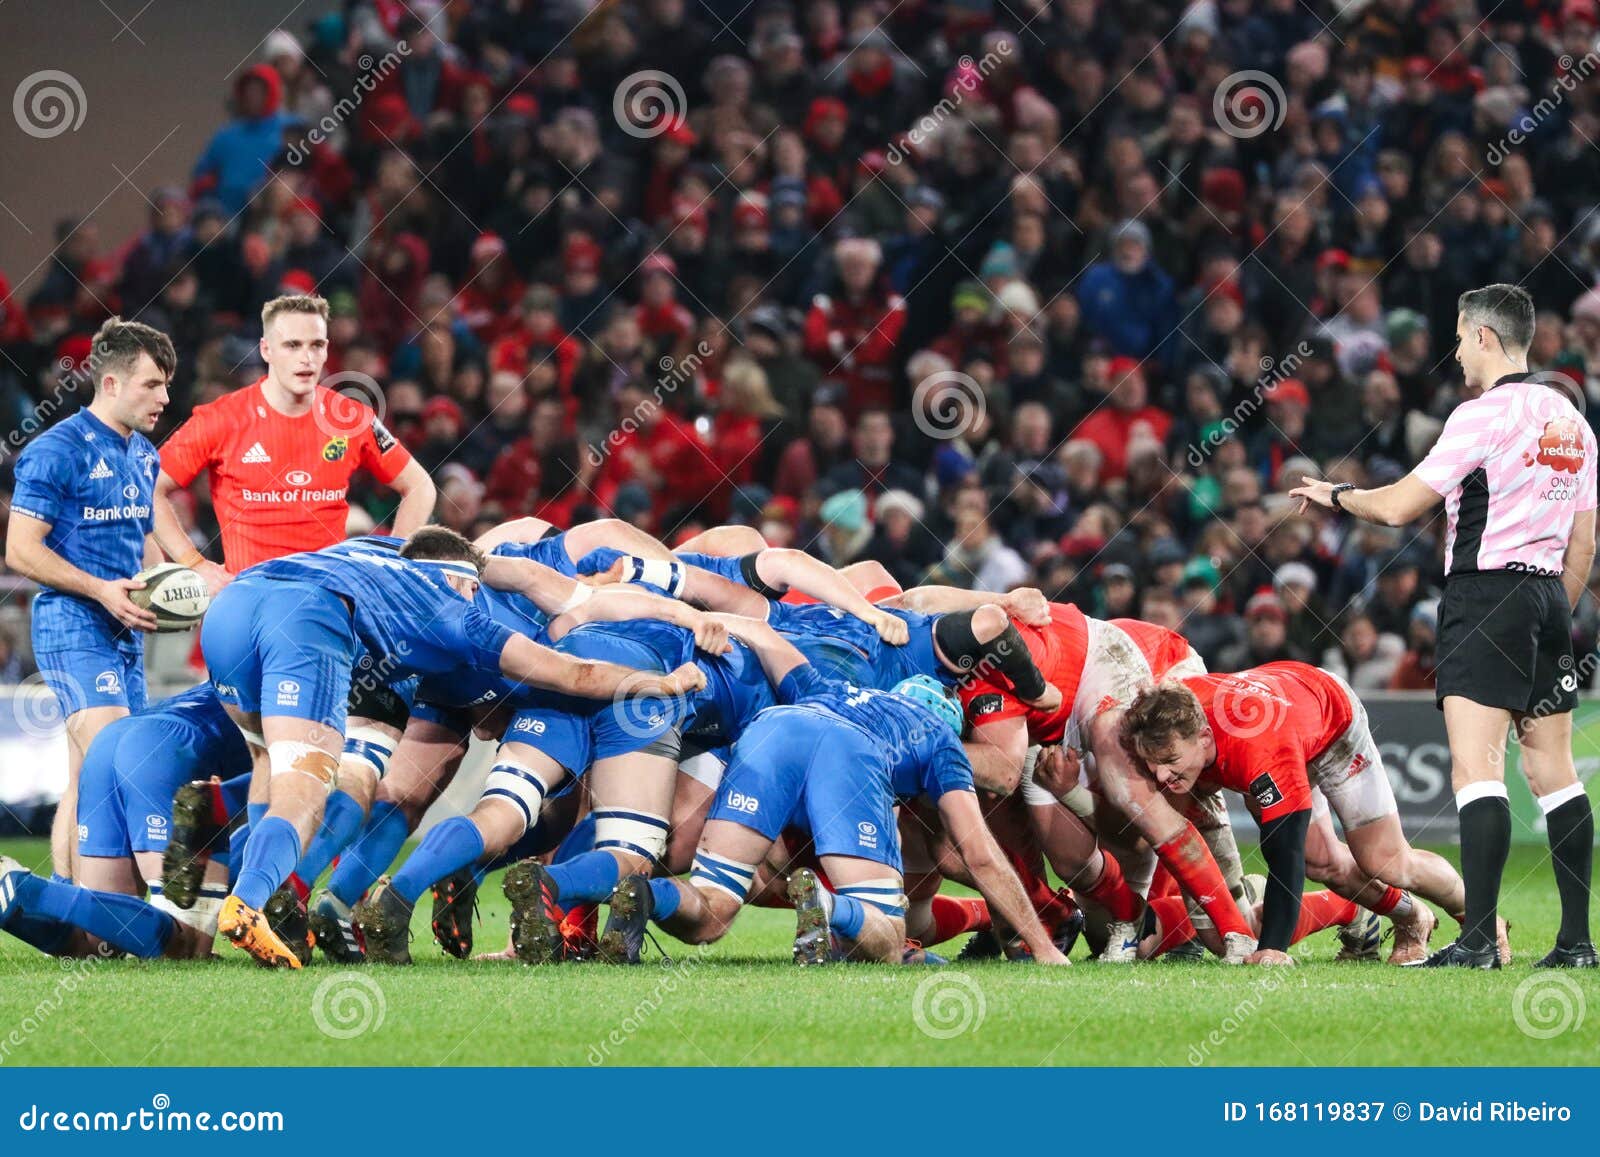 Pro 14 Match - Munster Rugby Versus Leinster Rugby Match at Thomond Park Editorial Photography